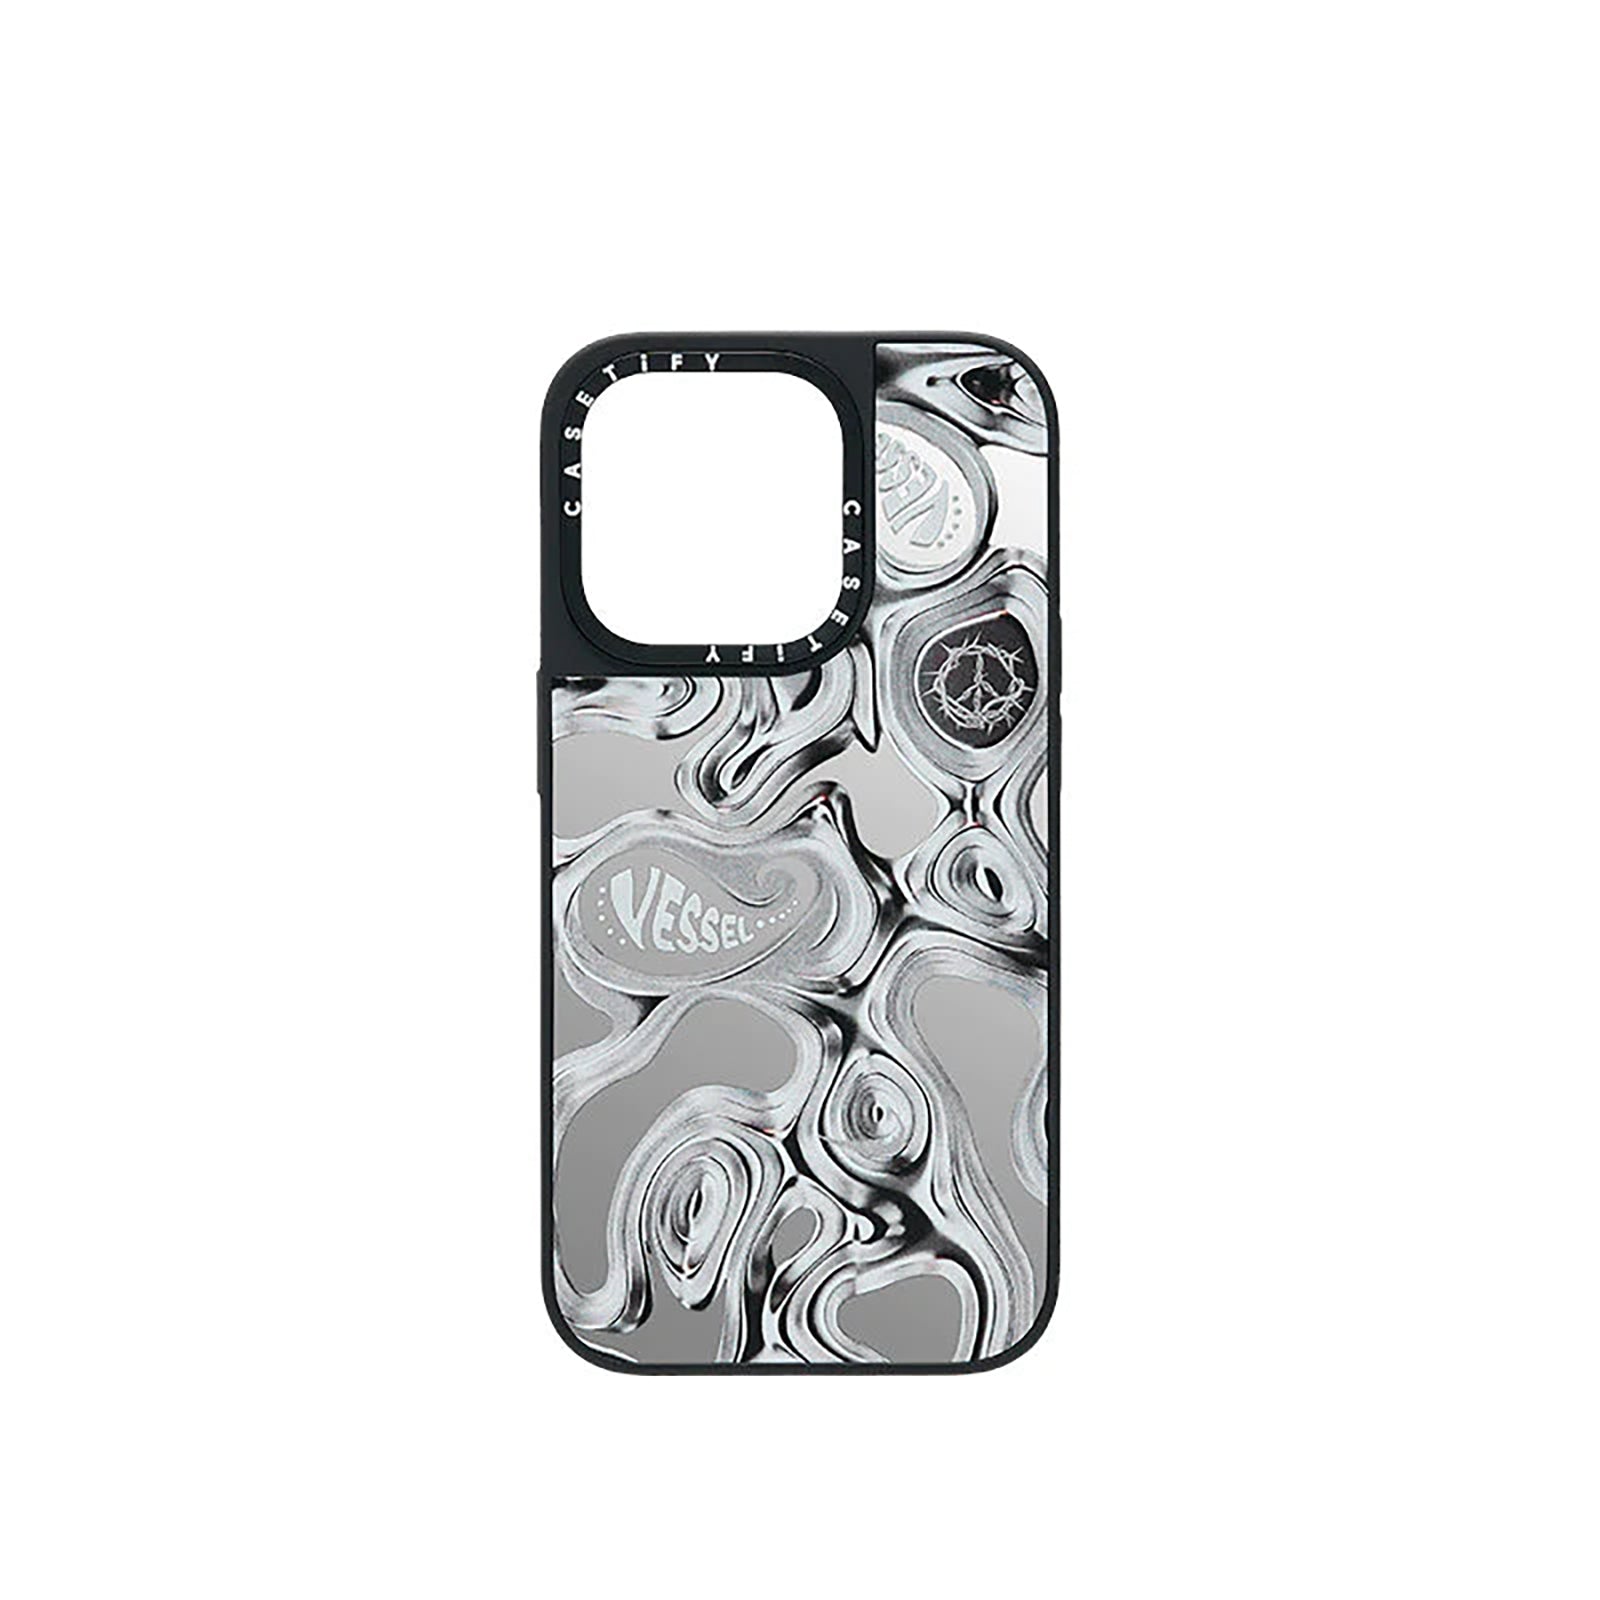 xVESSEL | CASETiFY Paisley Case